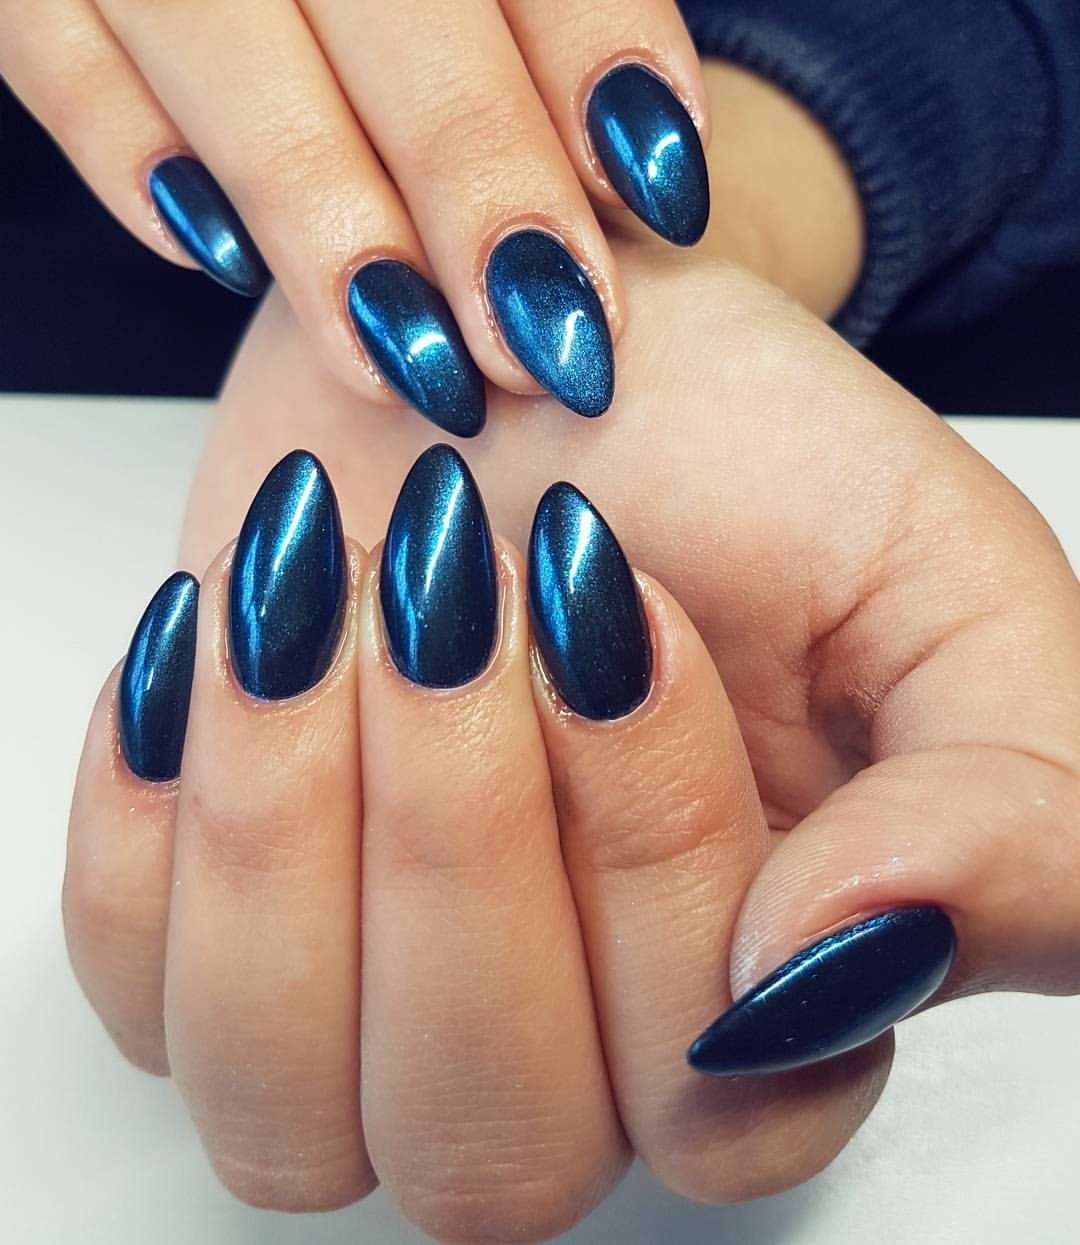 5 New Magnetic Nail Manicure For Cat Eye Nails (2019 ...